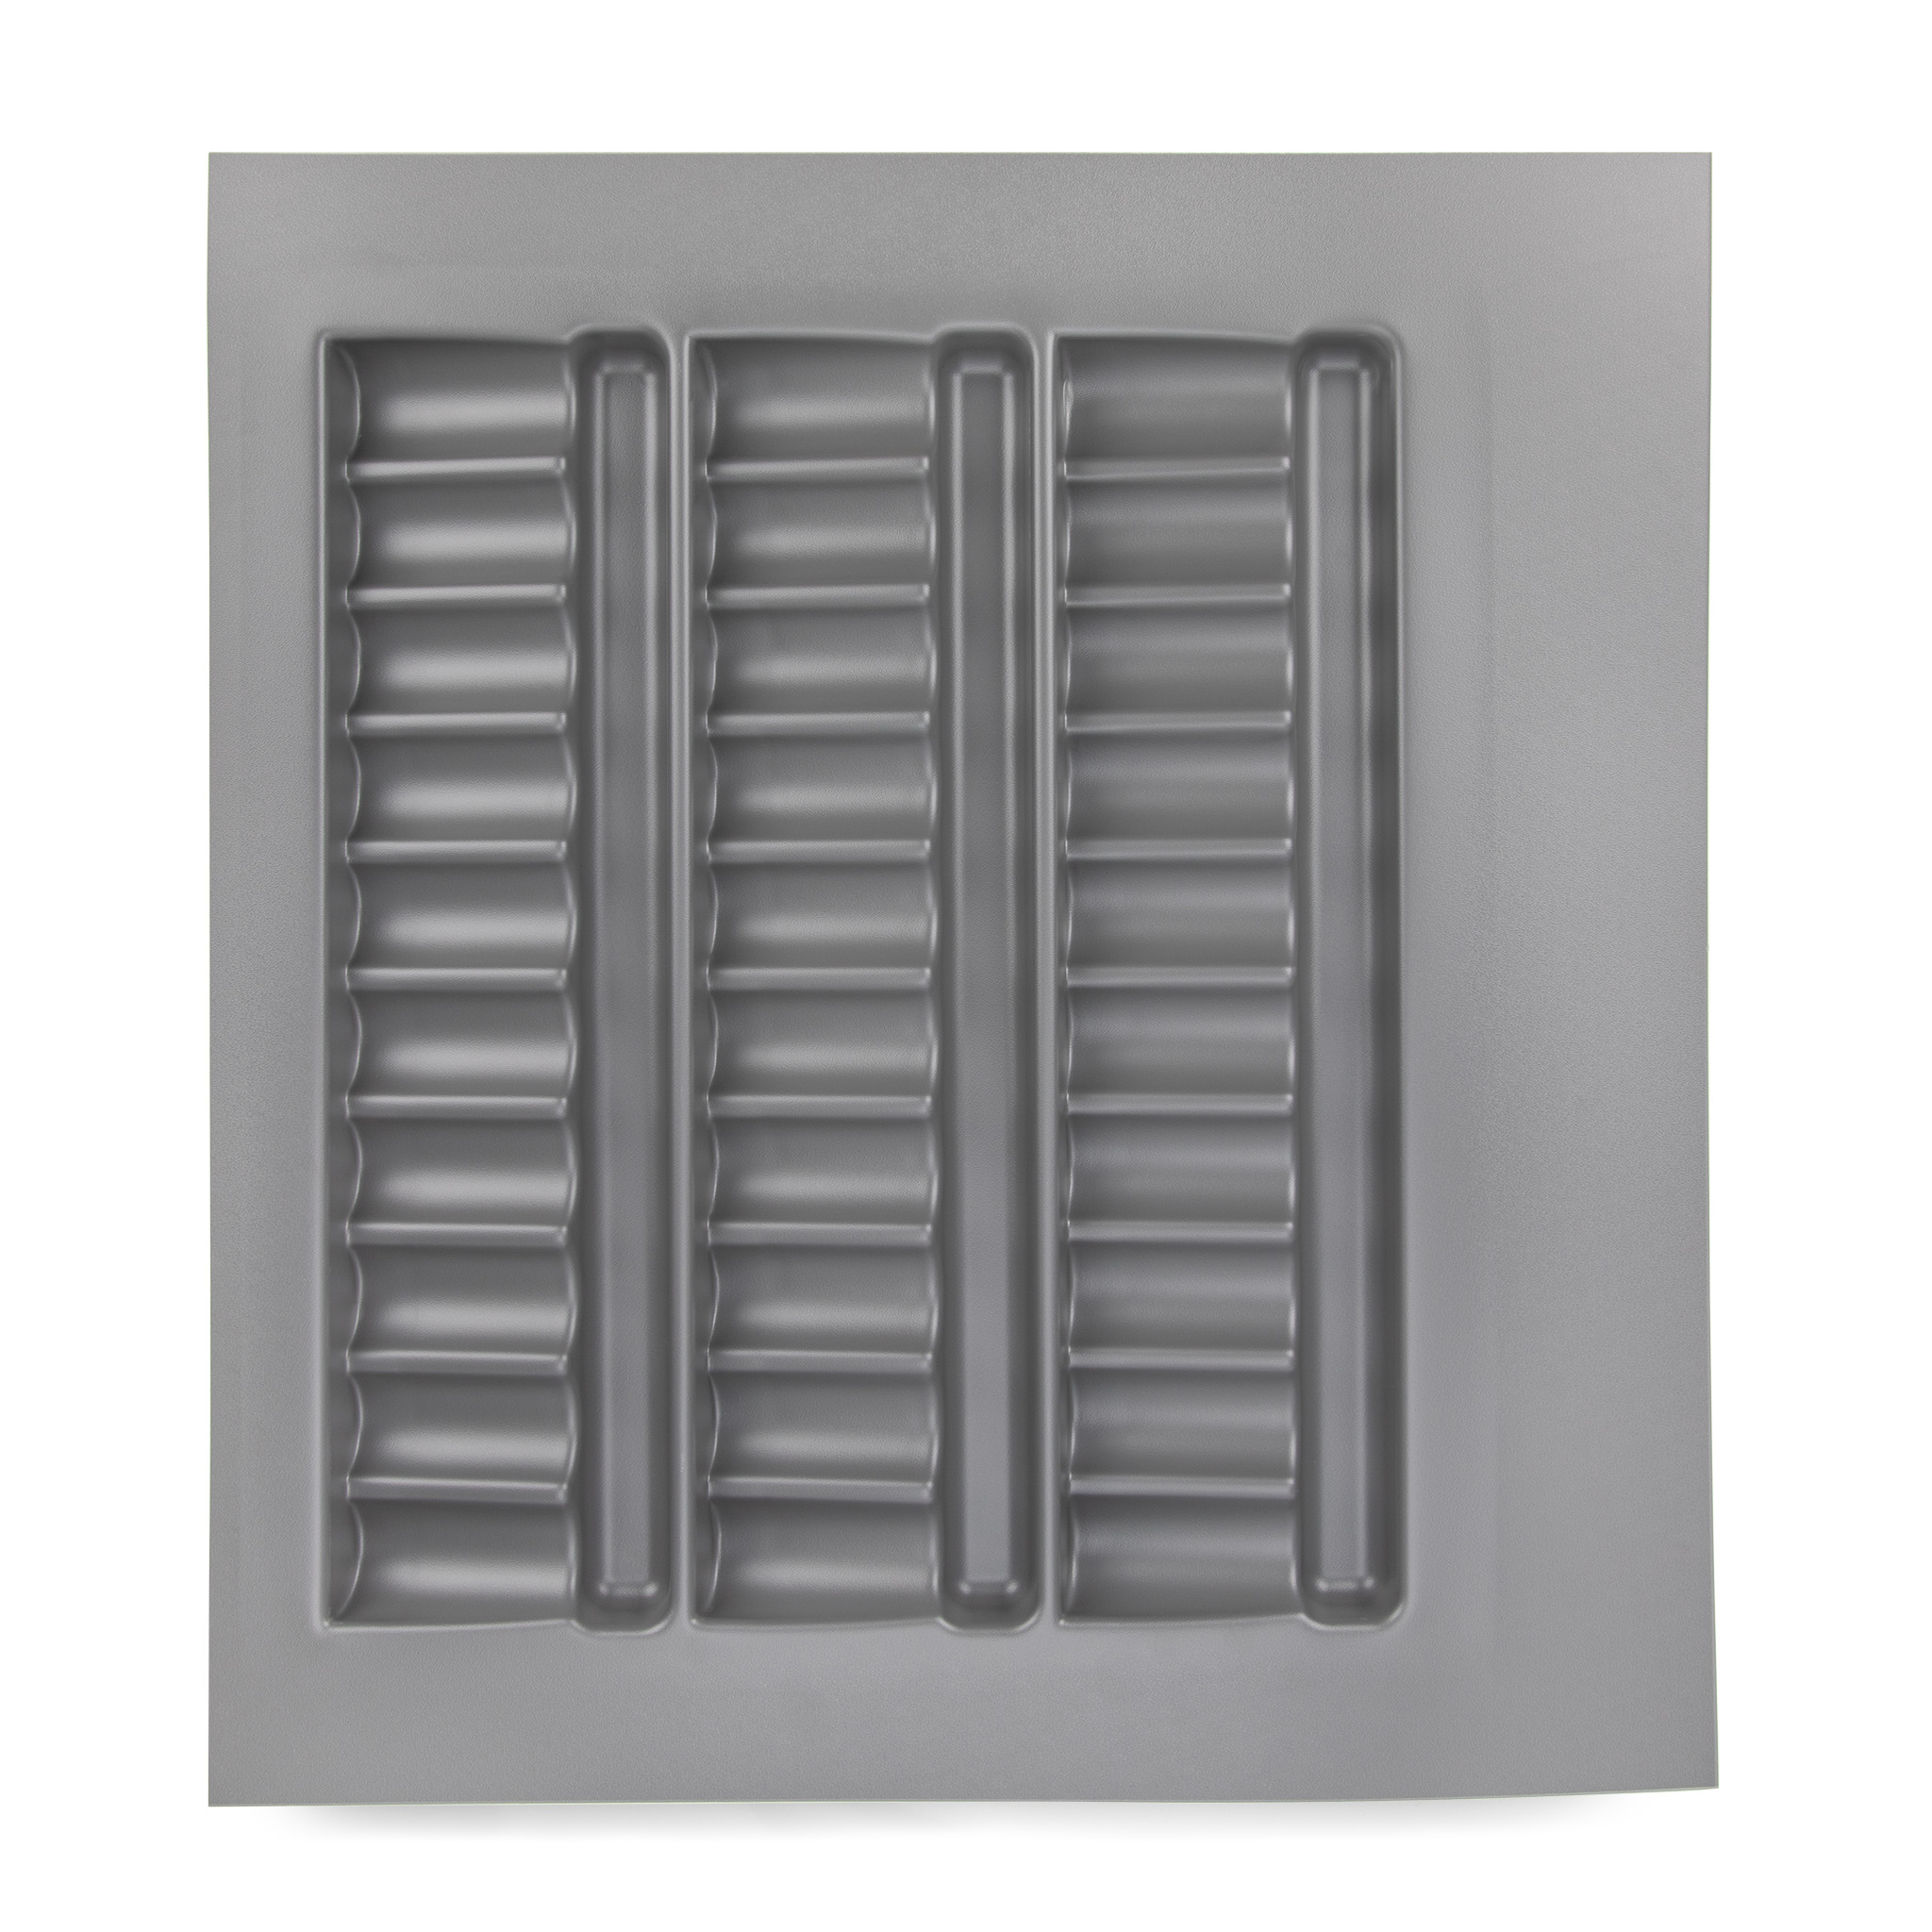 Area Spice Tray Organizers, 480mm - 600mm, Grey Matte